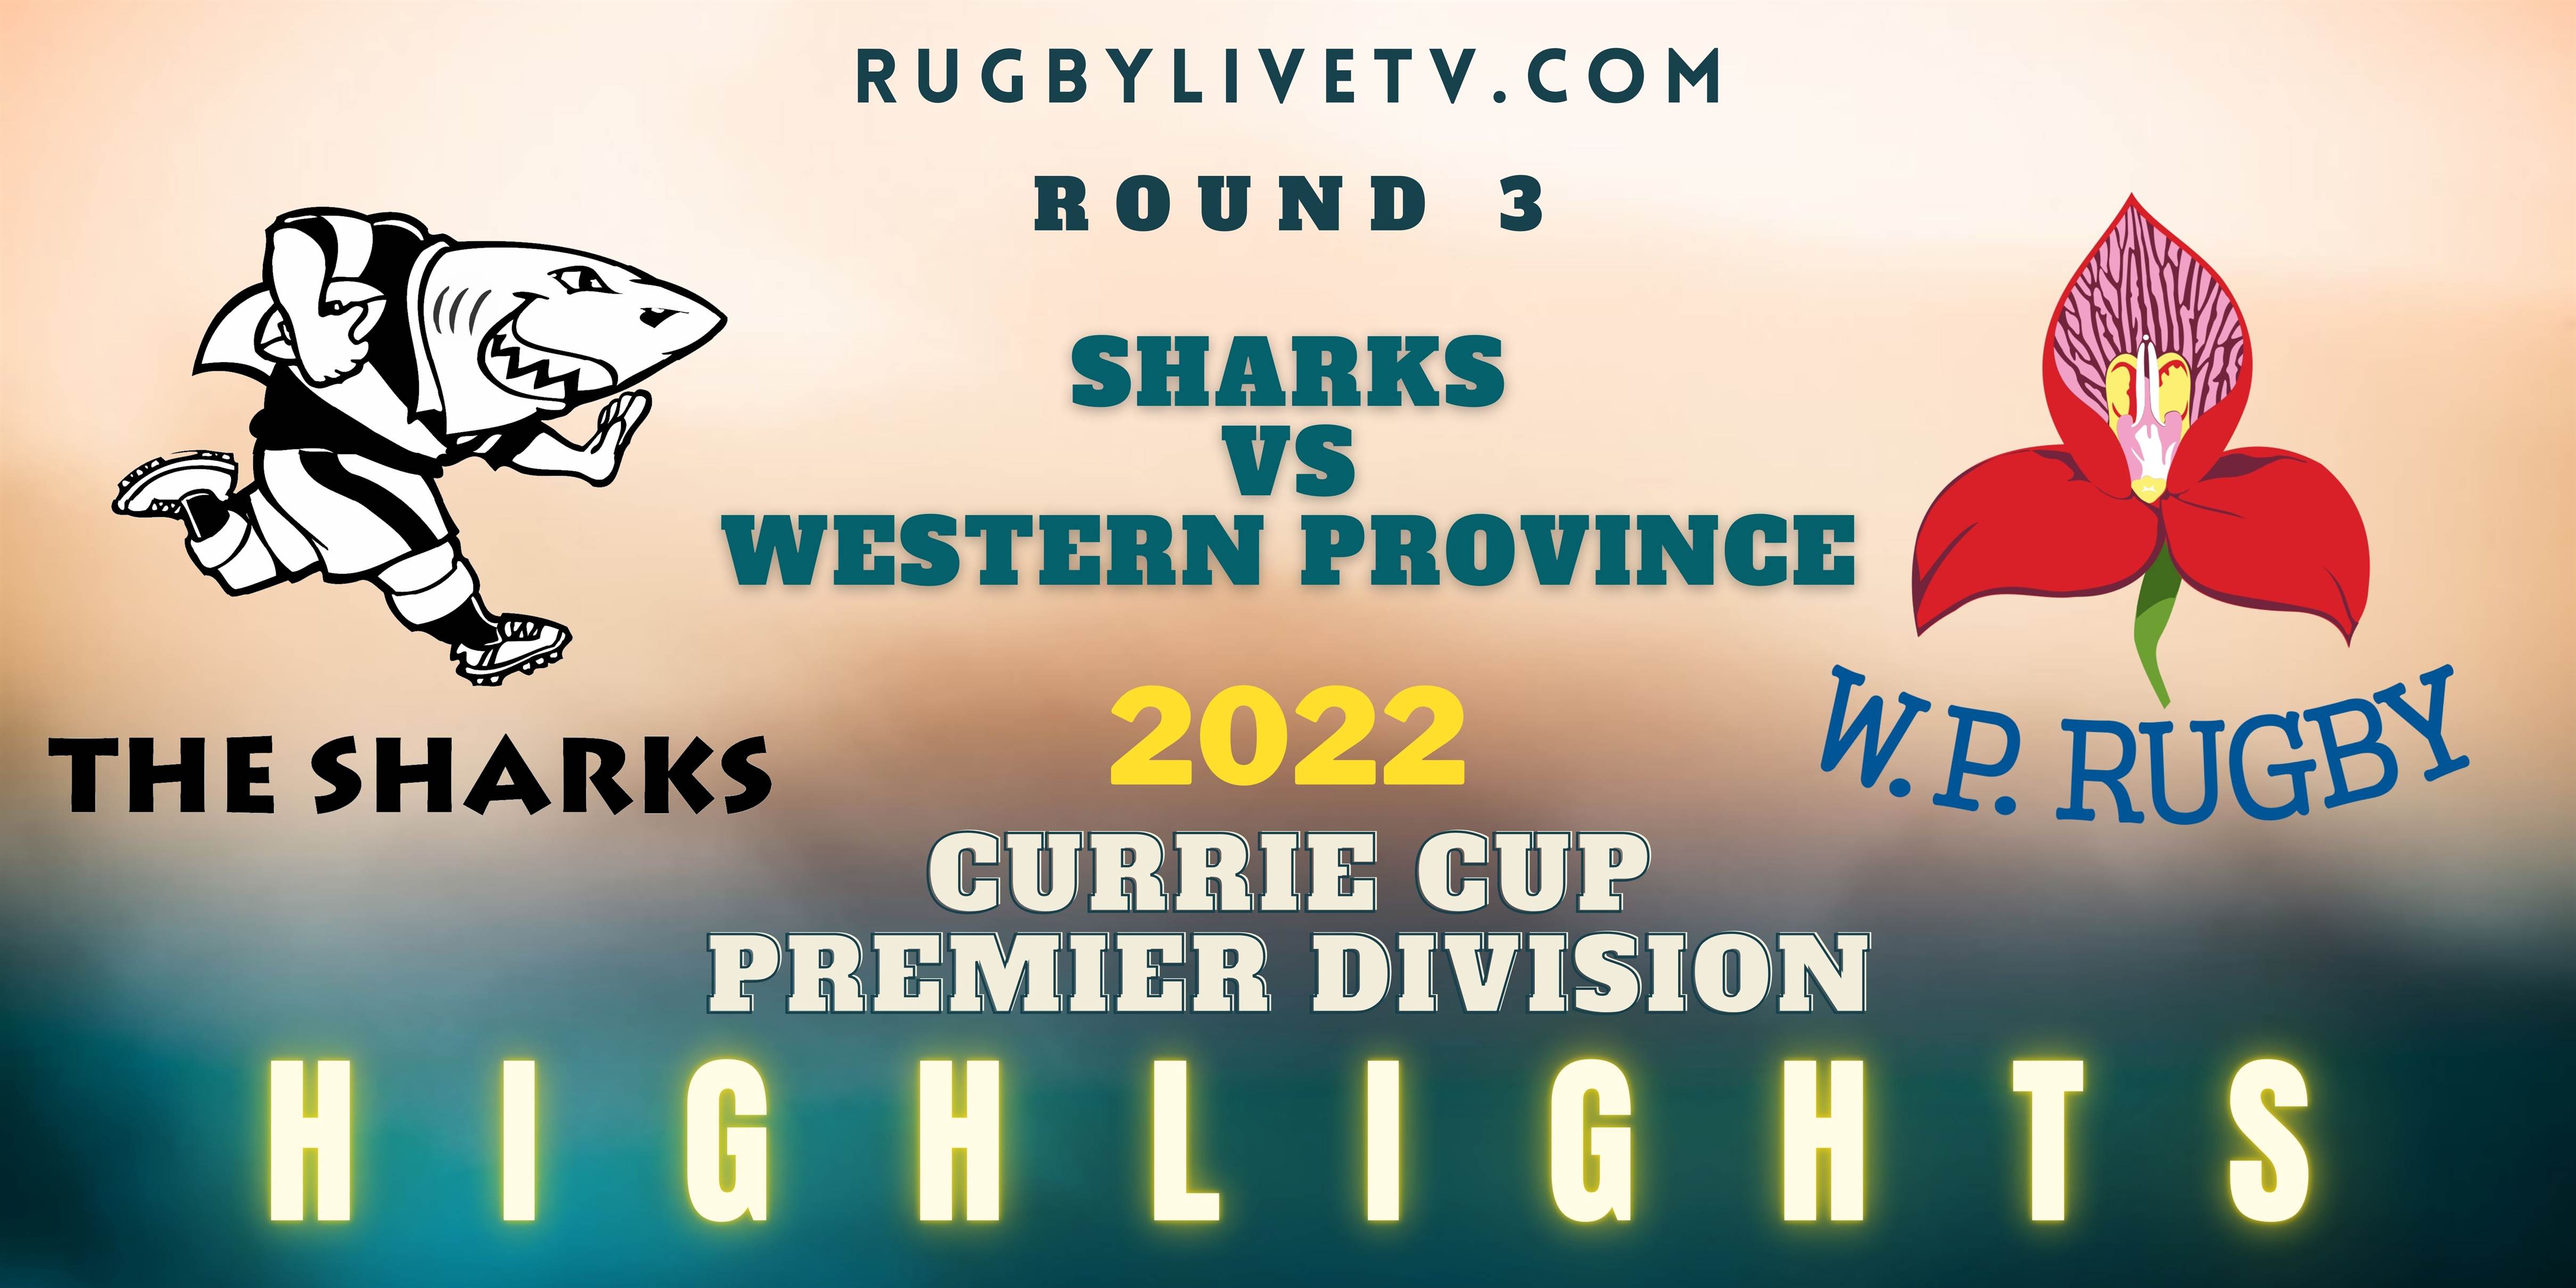 Griquas Vs Pumas Currie Cup Highlights 2022 Rd 3